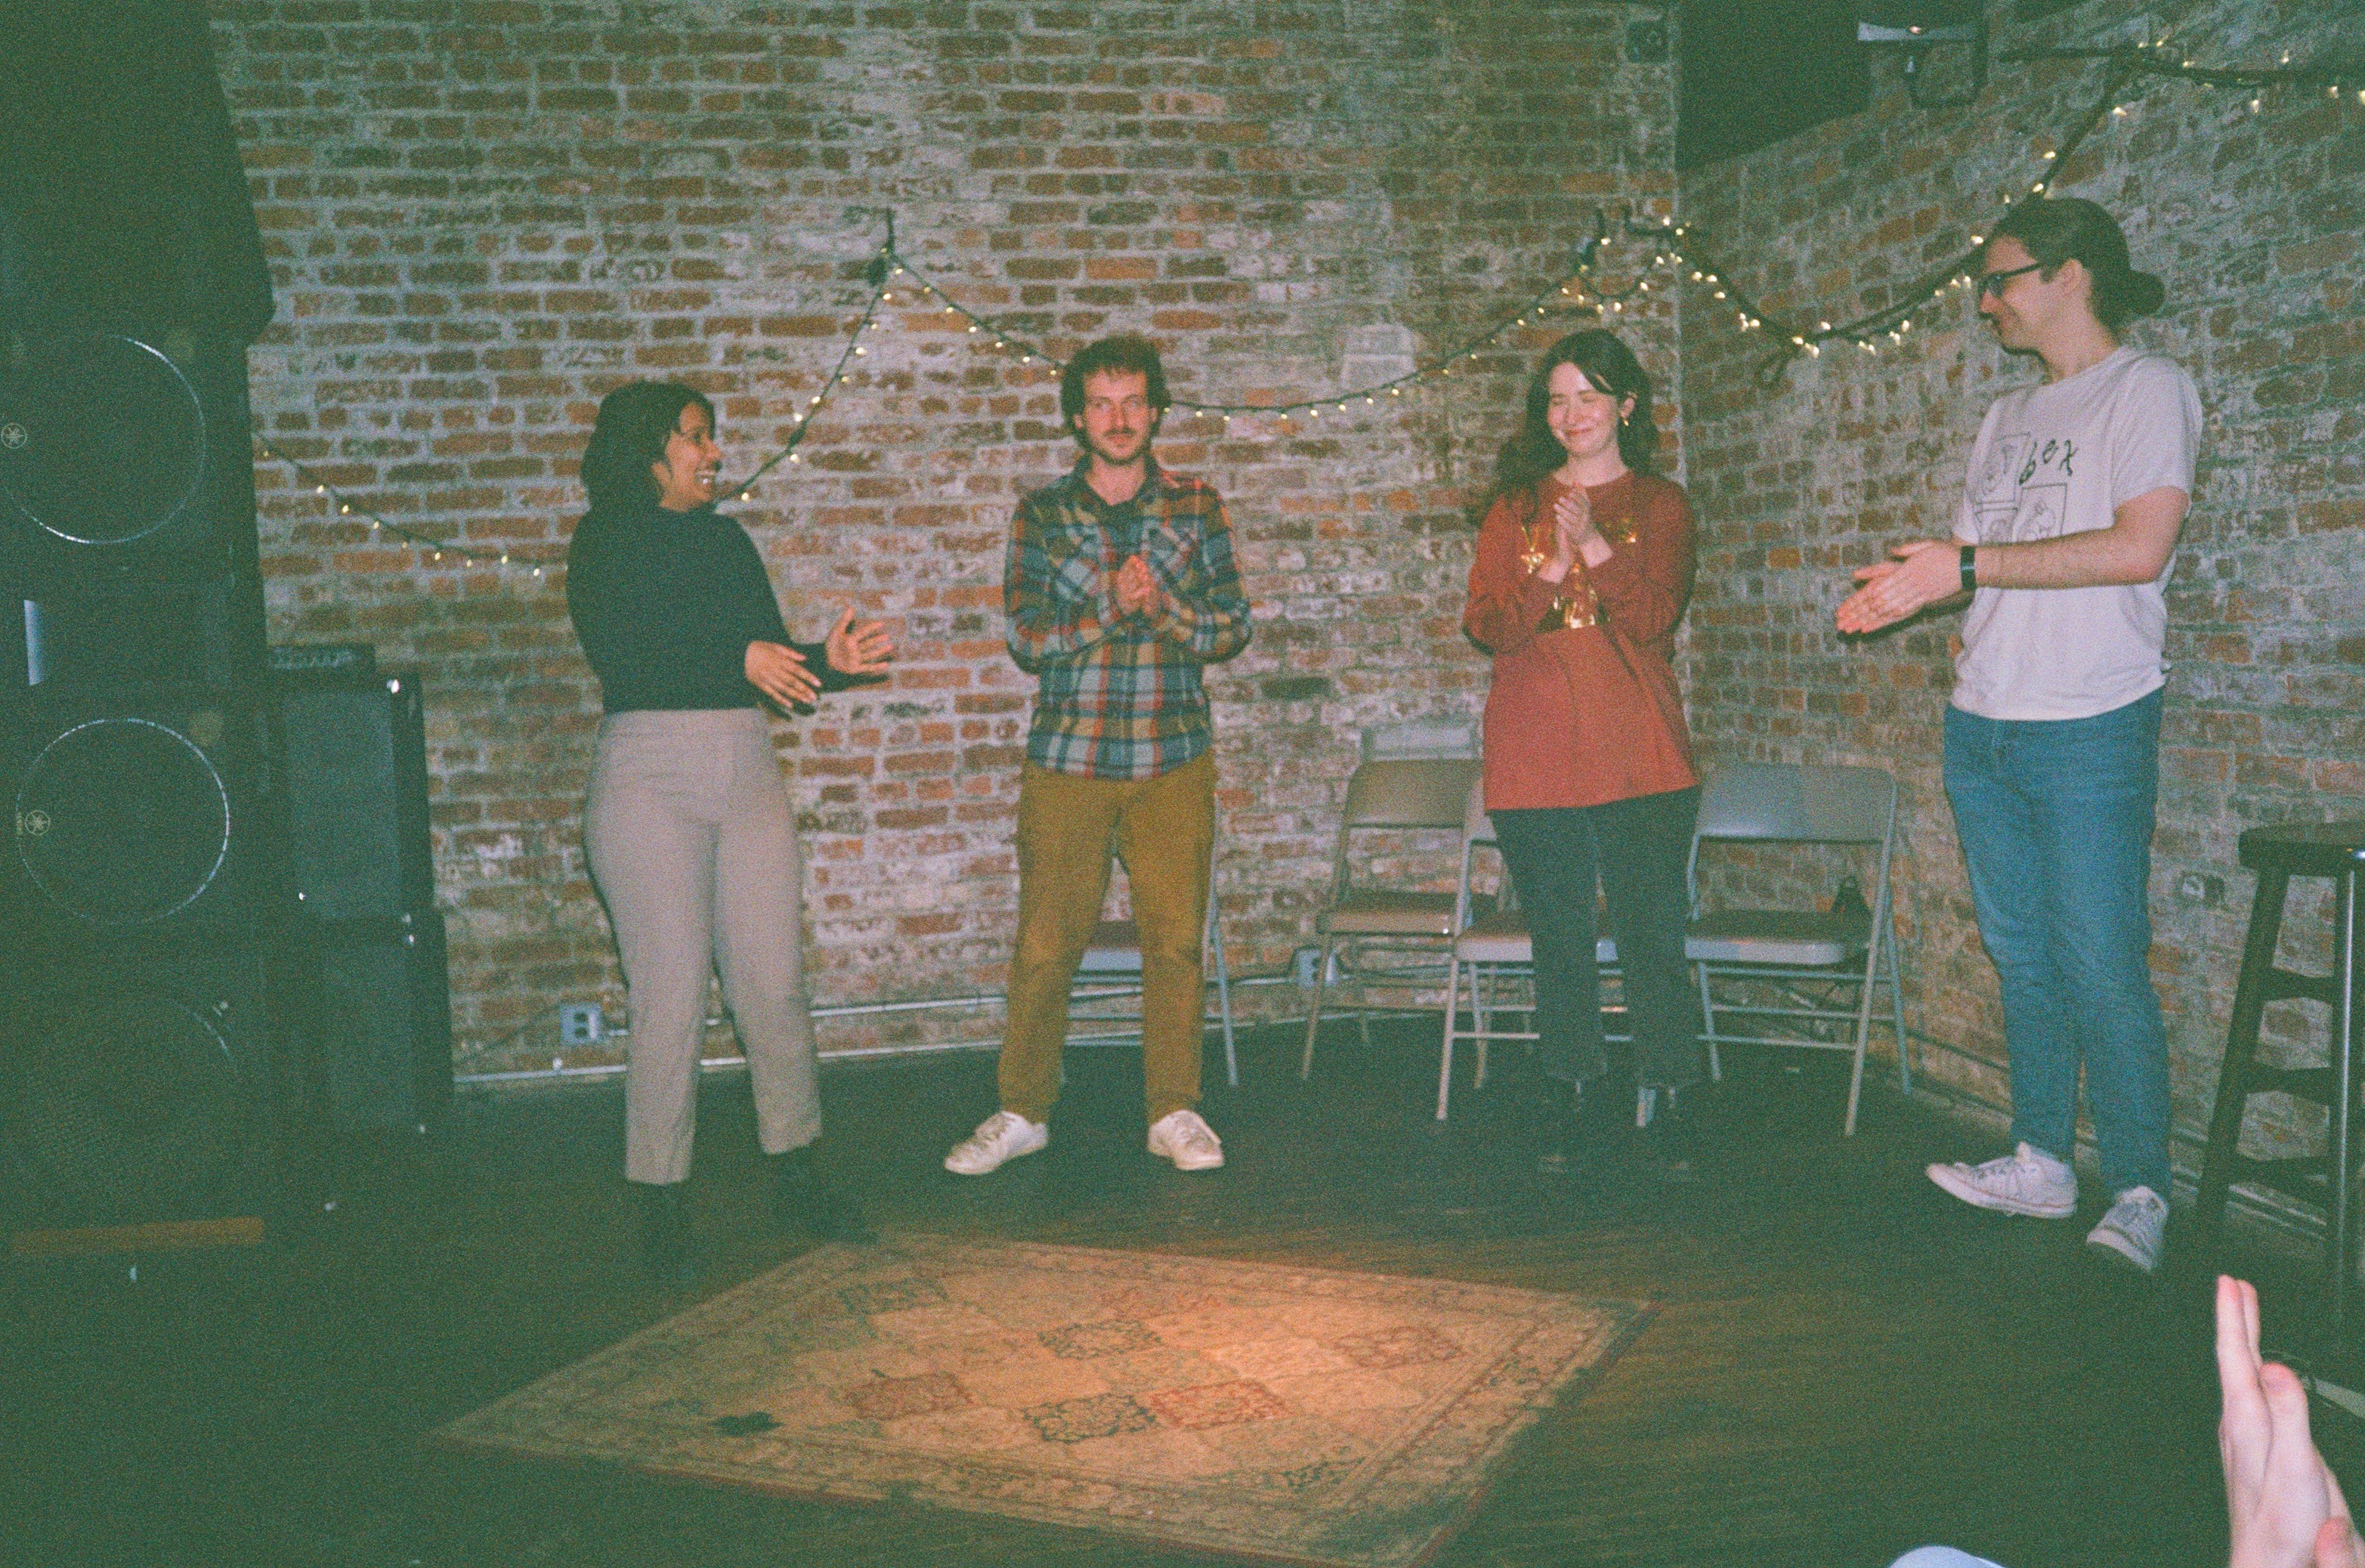 film photograph of beev awkwardly clapping on stage